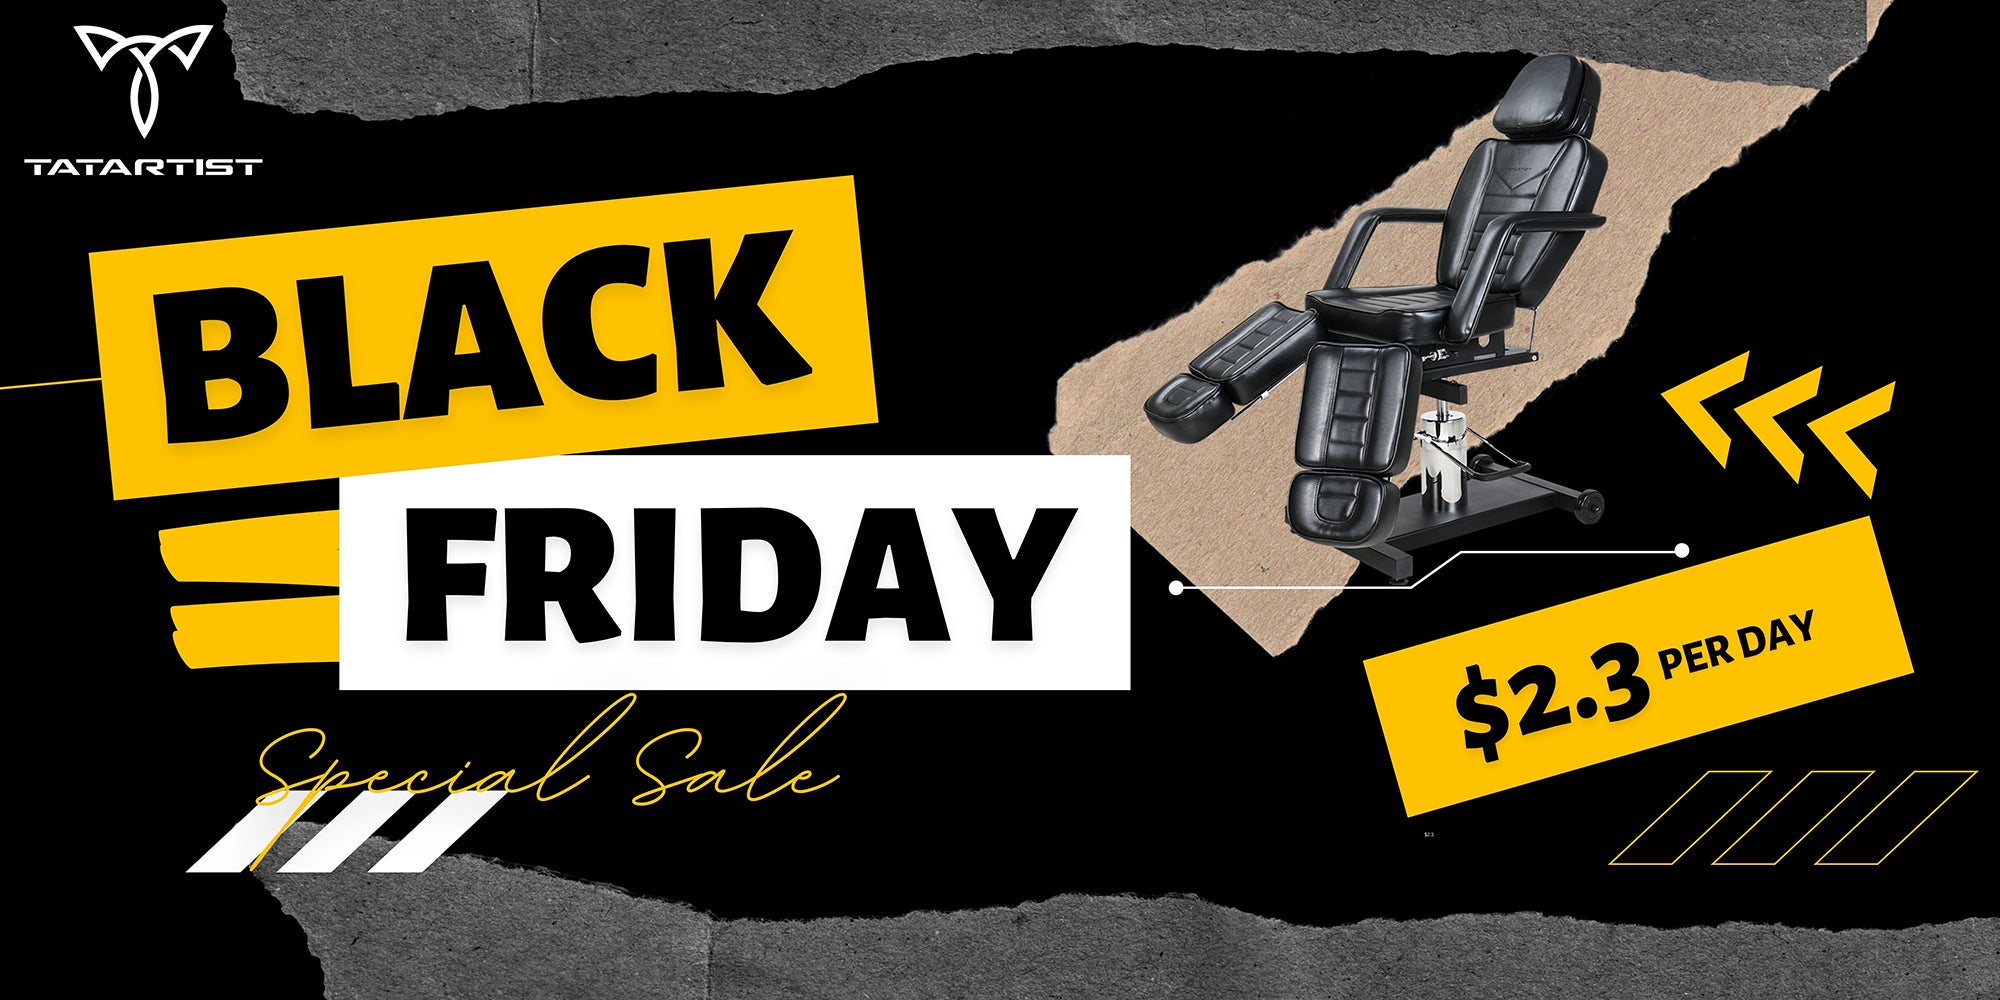 How to Save More on Black Friday at tattoo chair?